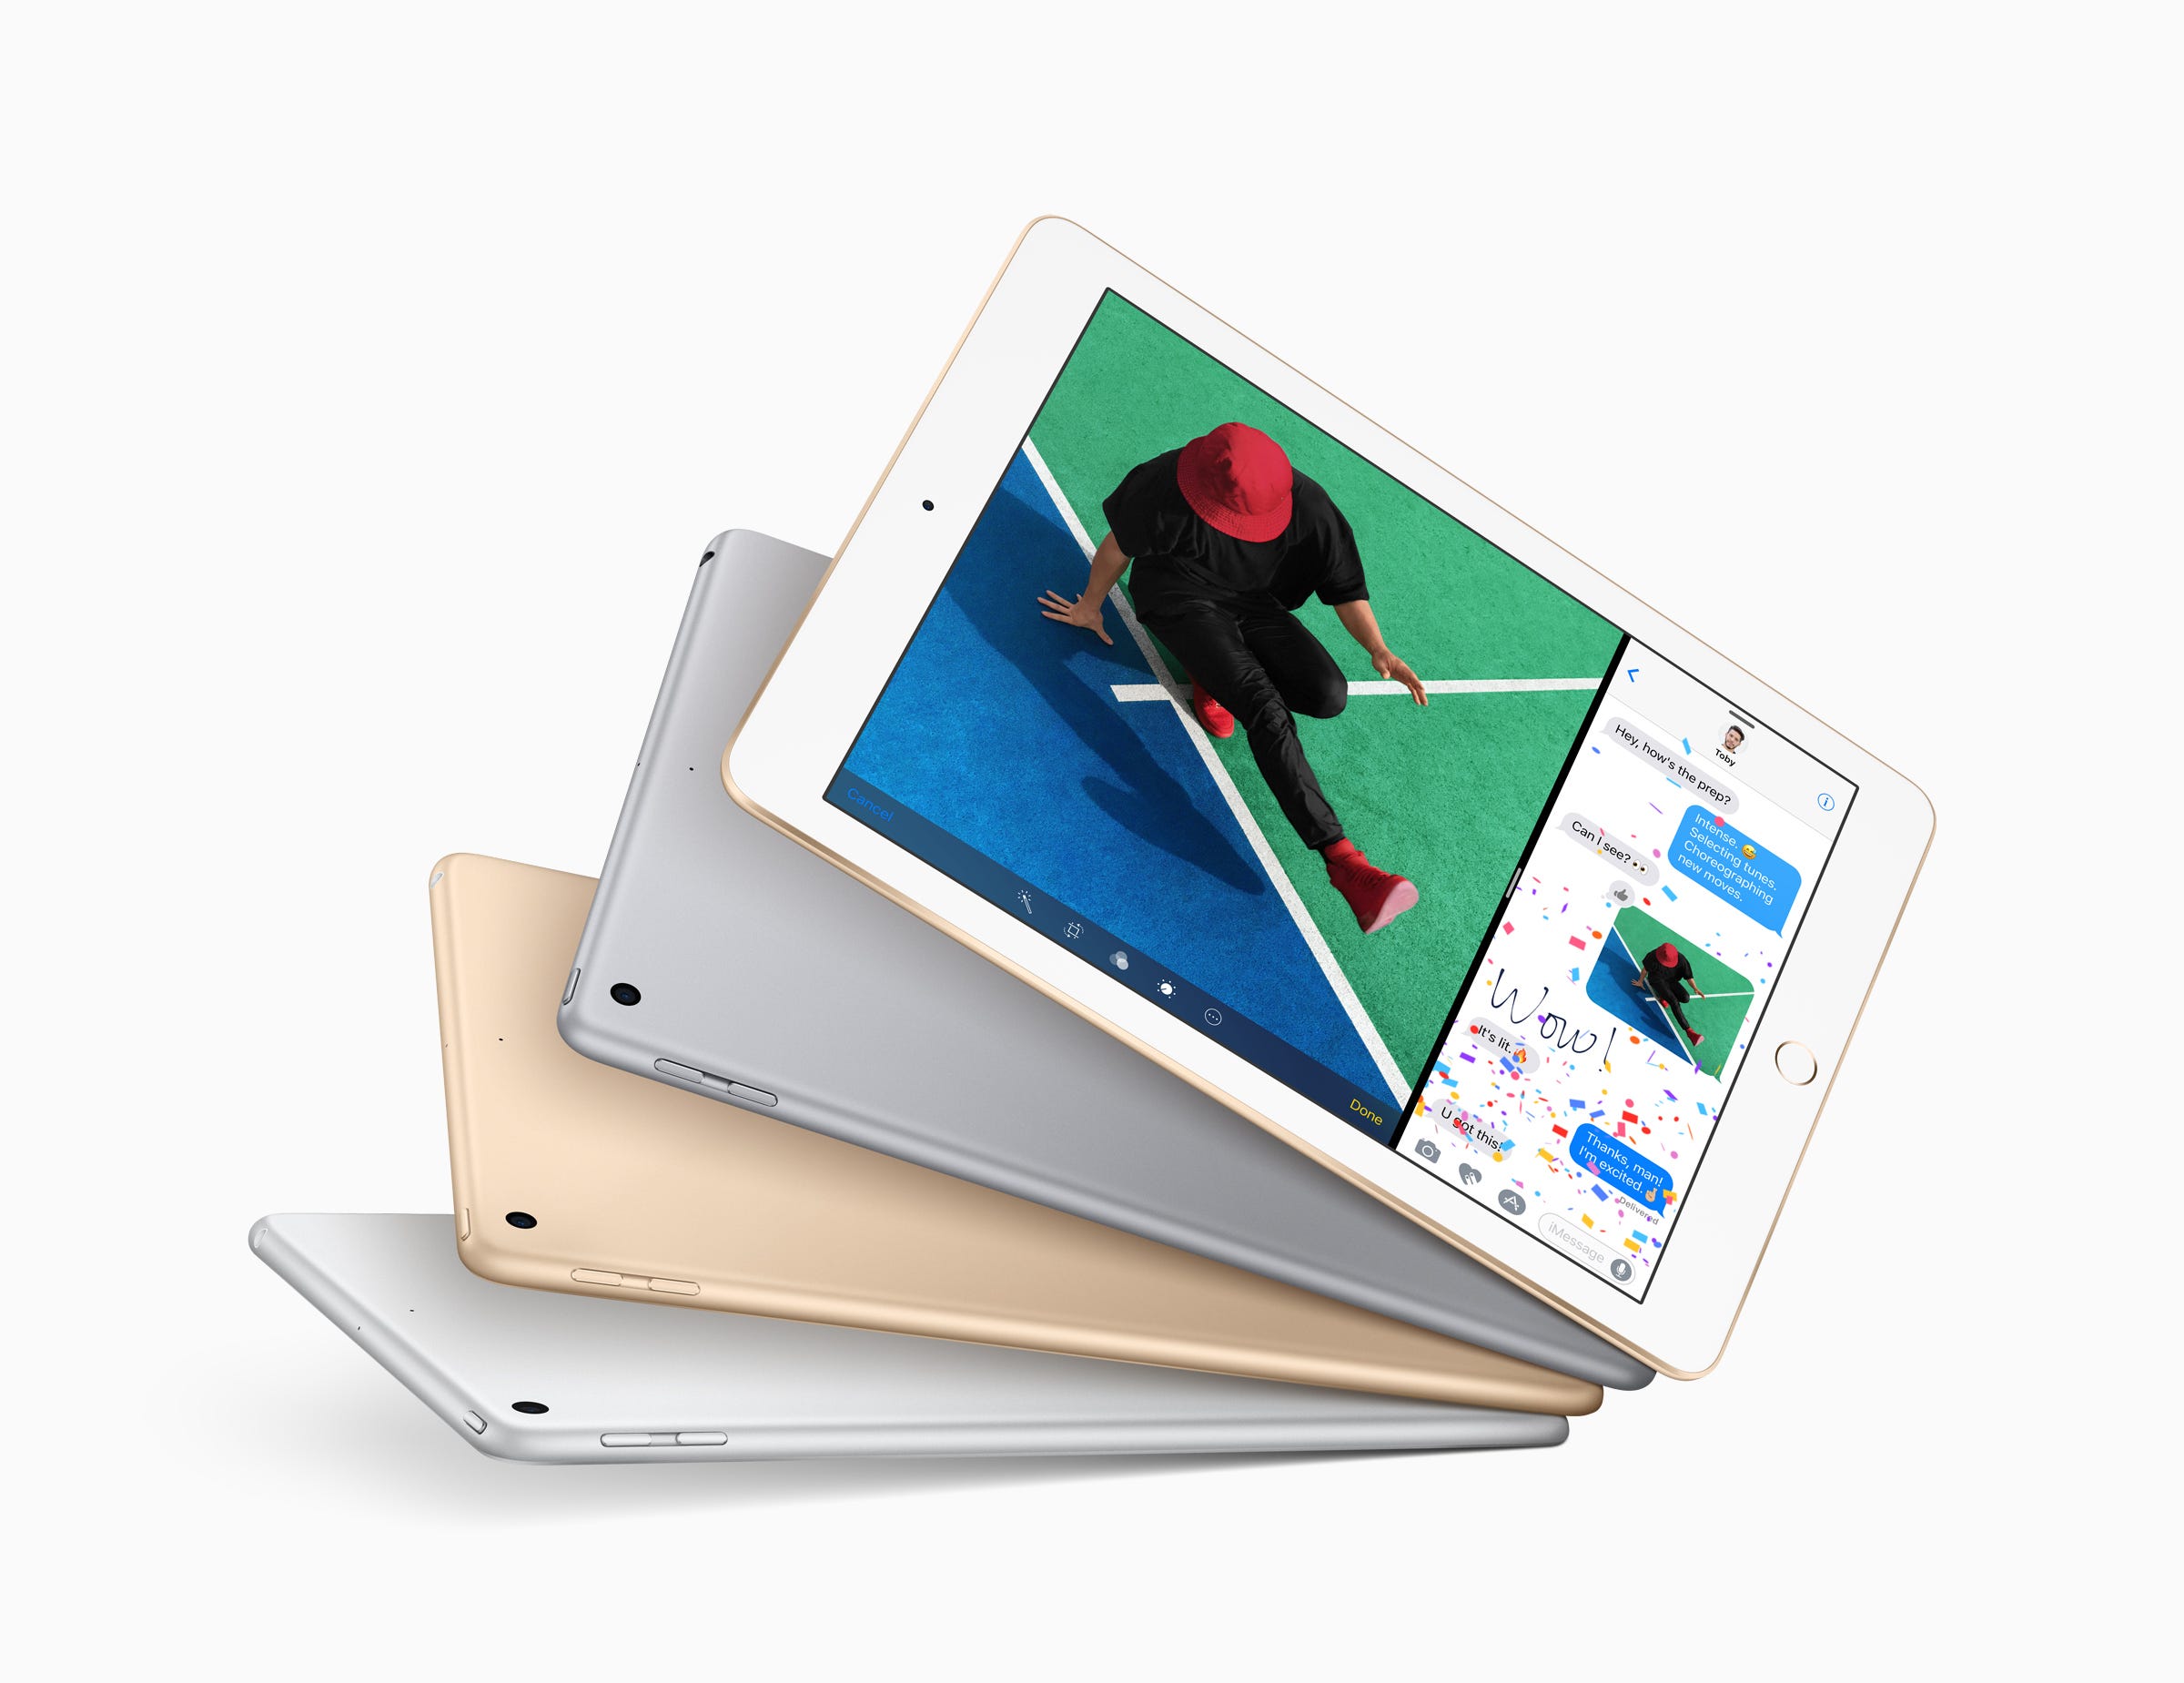 Apple unveils new iPad for $329, and you can order it in 3 days